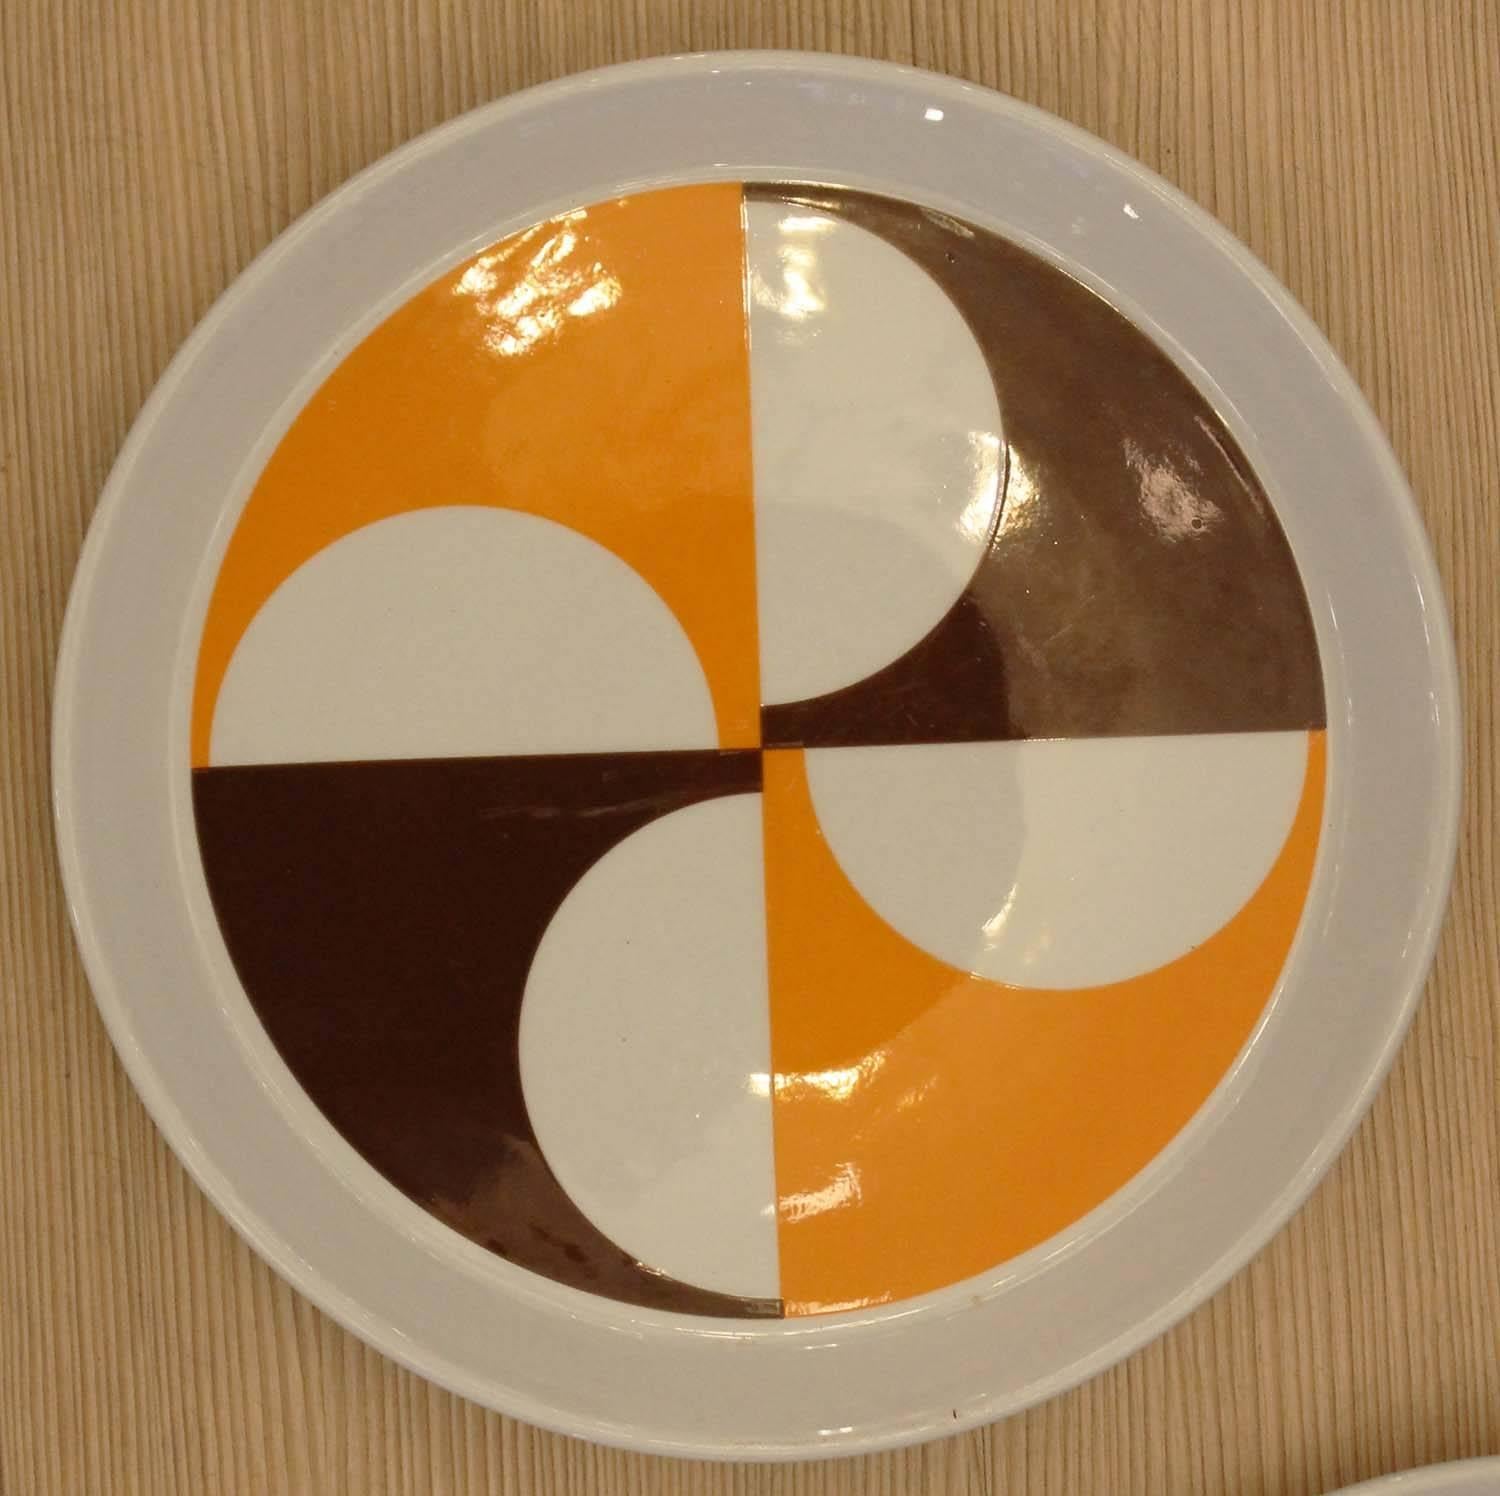 Set of two colorful plates designed by Gio Ponti for Ceramica Franco Pozzi. Label on the back. Perfect for bringing a splash of color to any room. Three separate sets with different designs are available which can be mixed and matched. $500.00 per